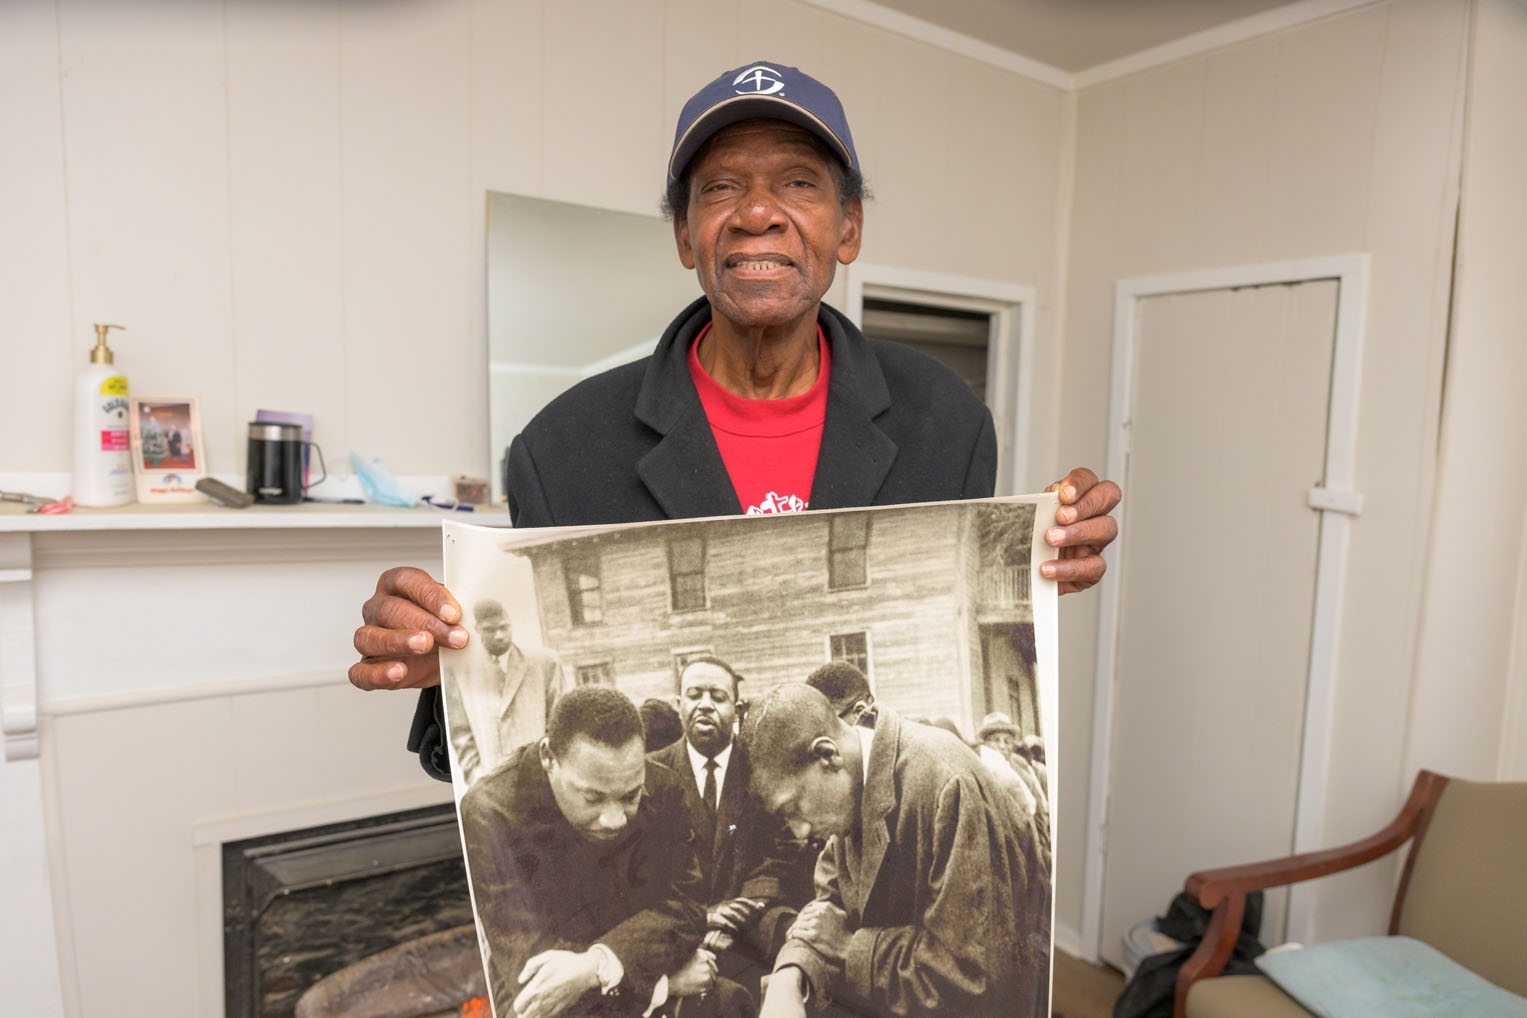 Rev. Benny Tucker served as a body guard for Dr. Martin Luther King during his 1965 year-long stay in Selma. Rev. Tucker is pictured in the top left of his treasured photograph.